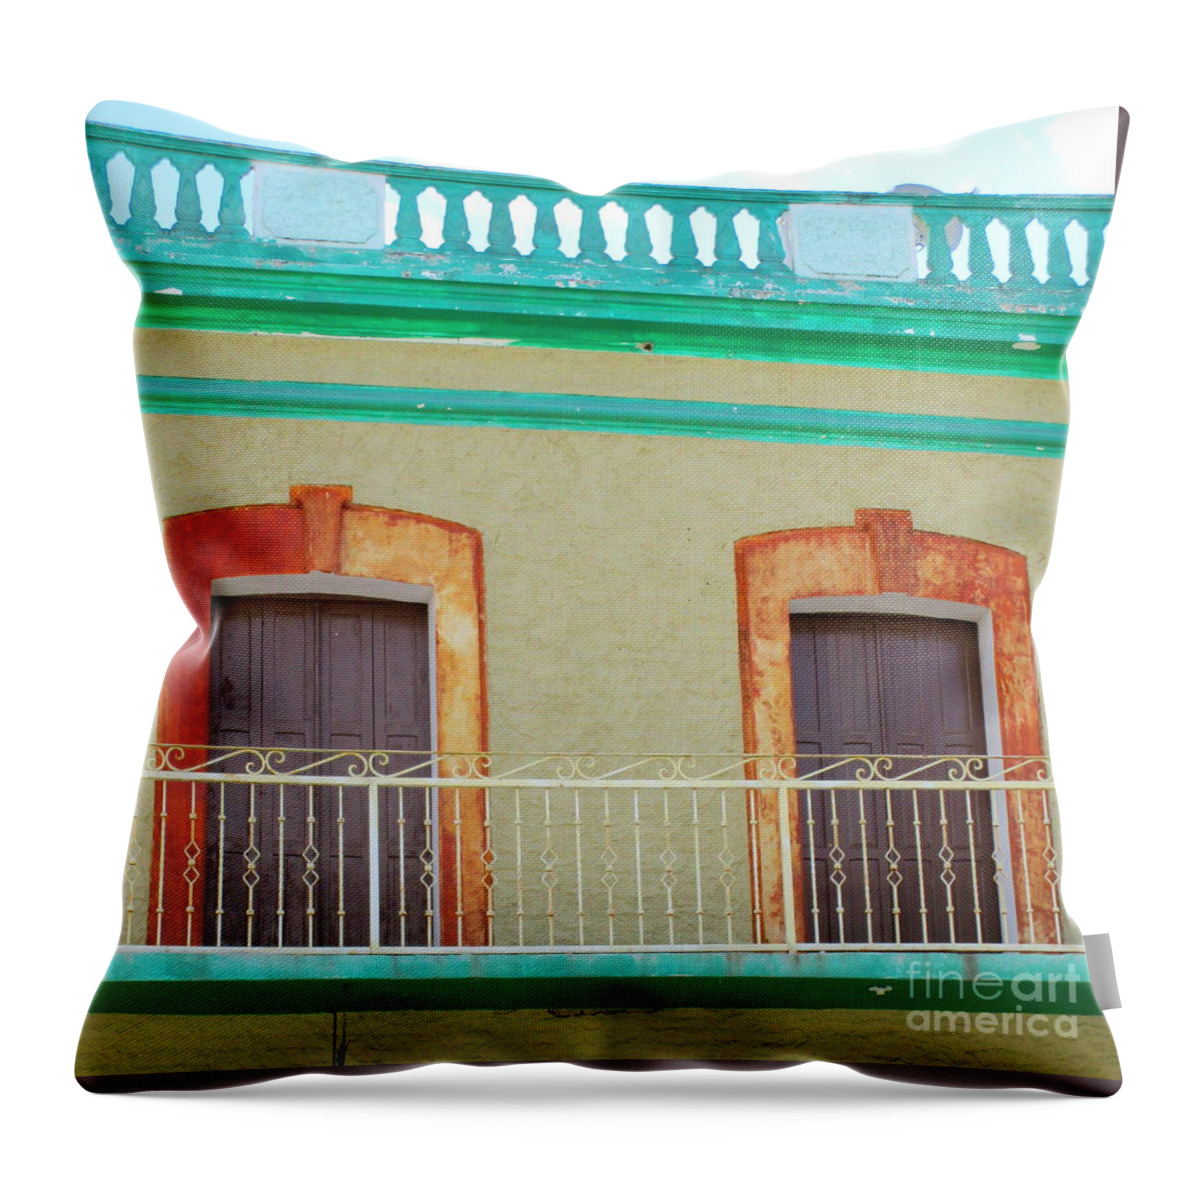 San Jose Del Cabo Throw Pillow featuring the photograph San Jose Del Cabo Doors 11 by Randall Weidner